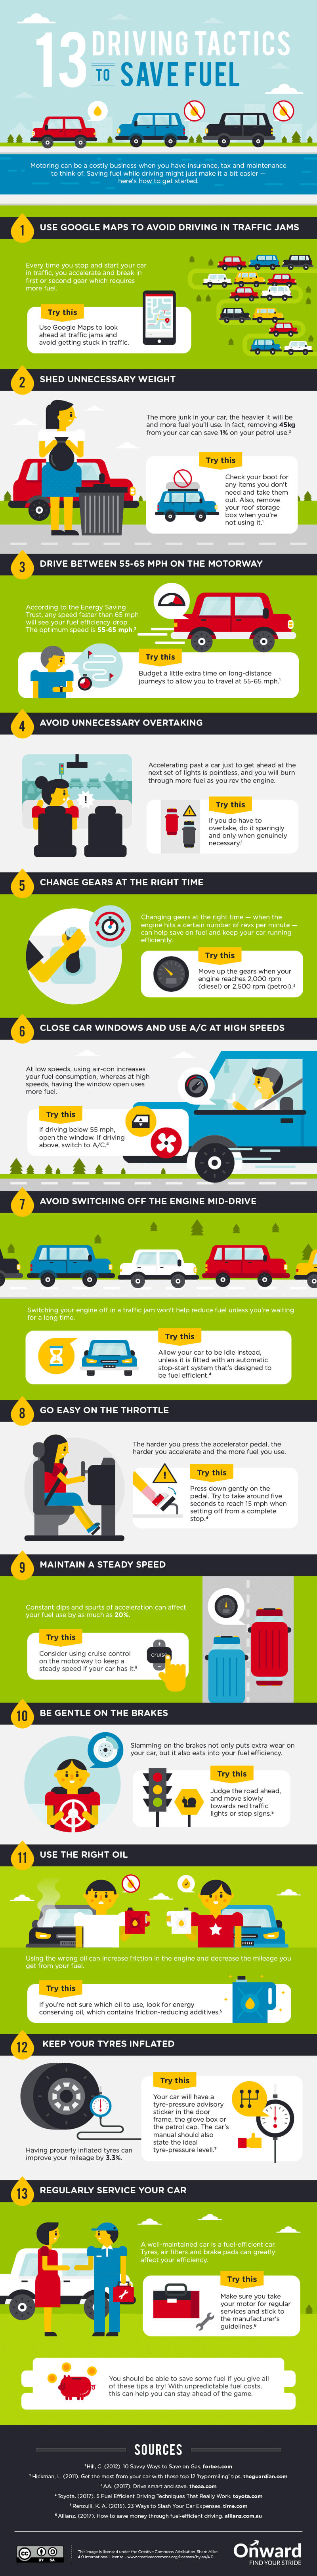 13 Driving Tactics to Save Fuel Infographic